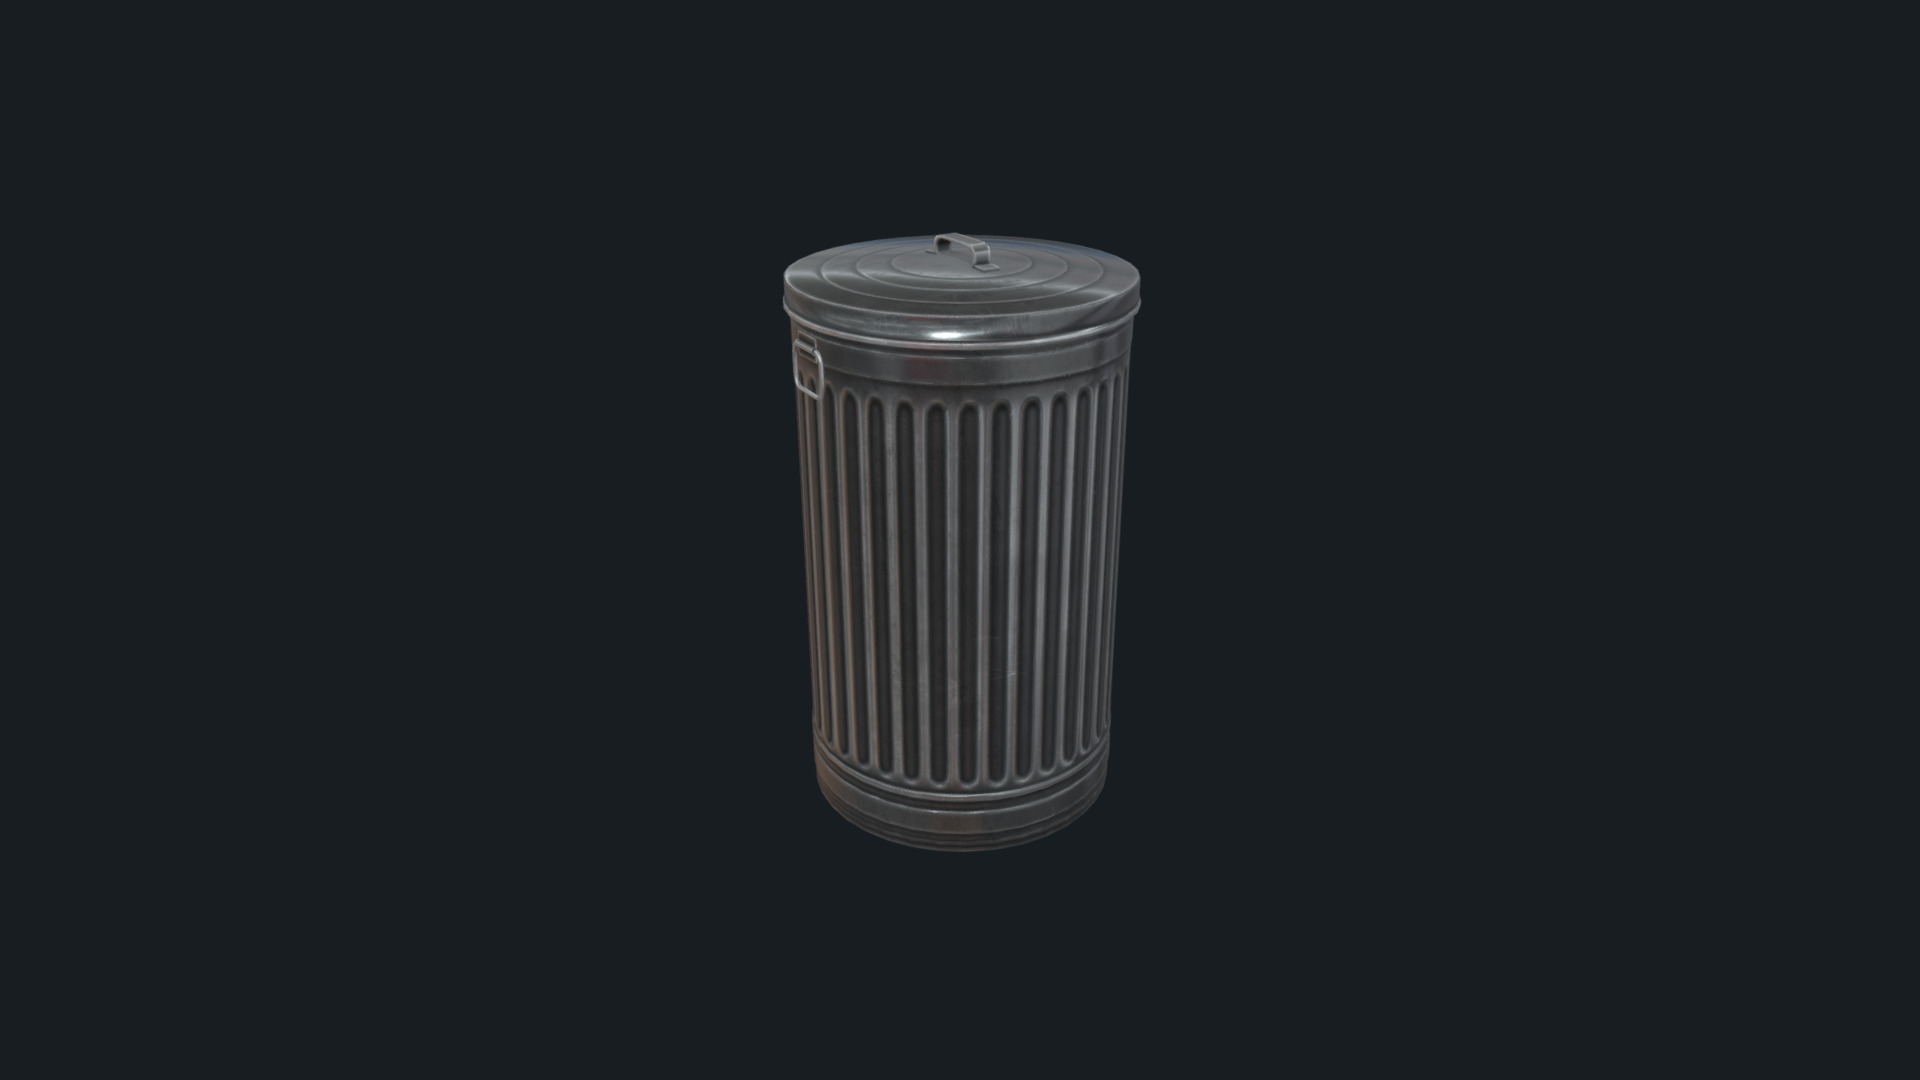 3D model Trash Can – Ready to Unity HDRP - This is a 3D model of the Trash Can - Ready to Unity HDRP. The 3D model is about a silver can with a black background.